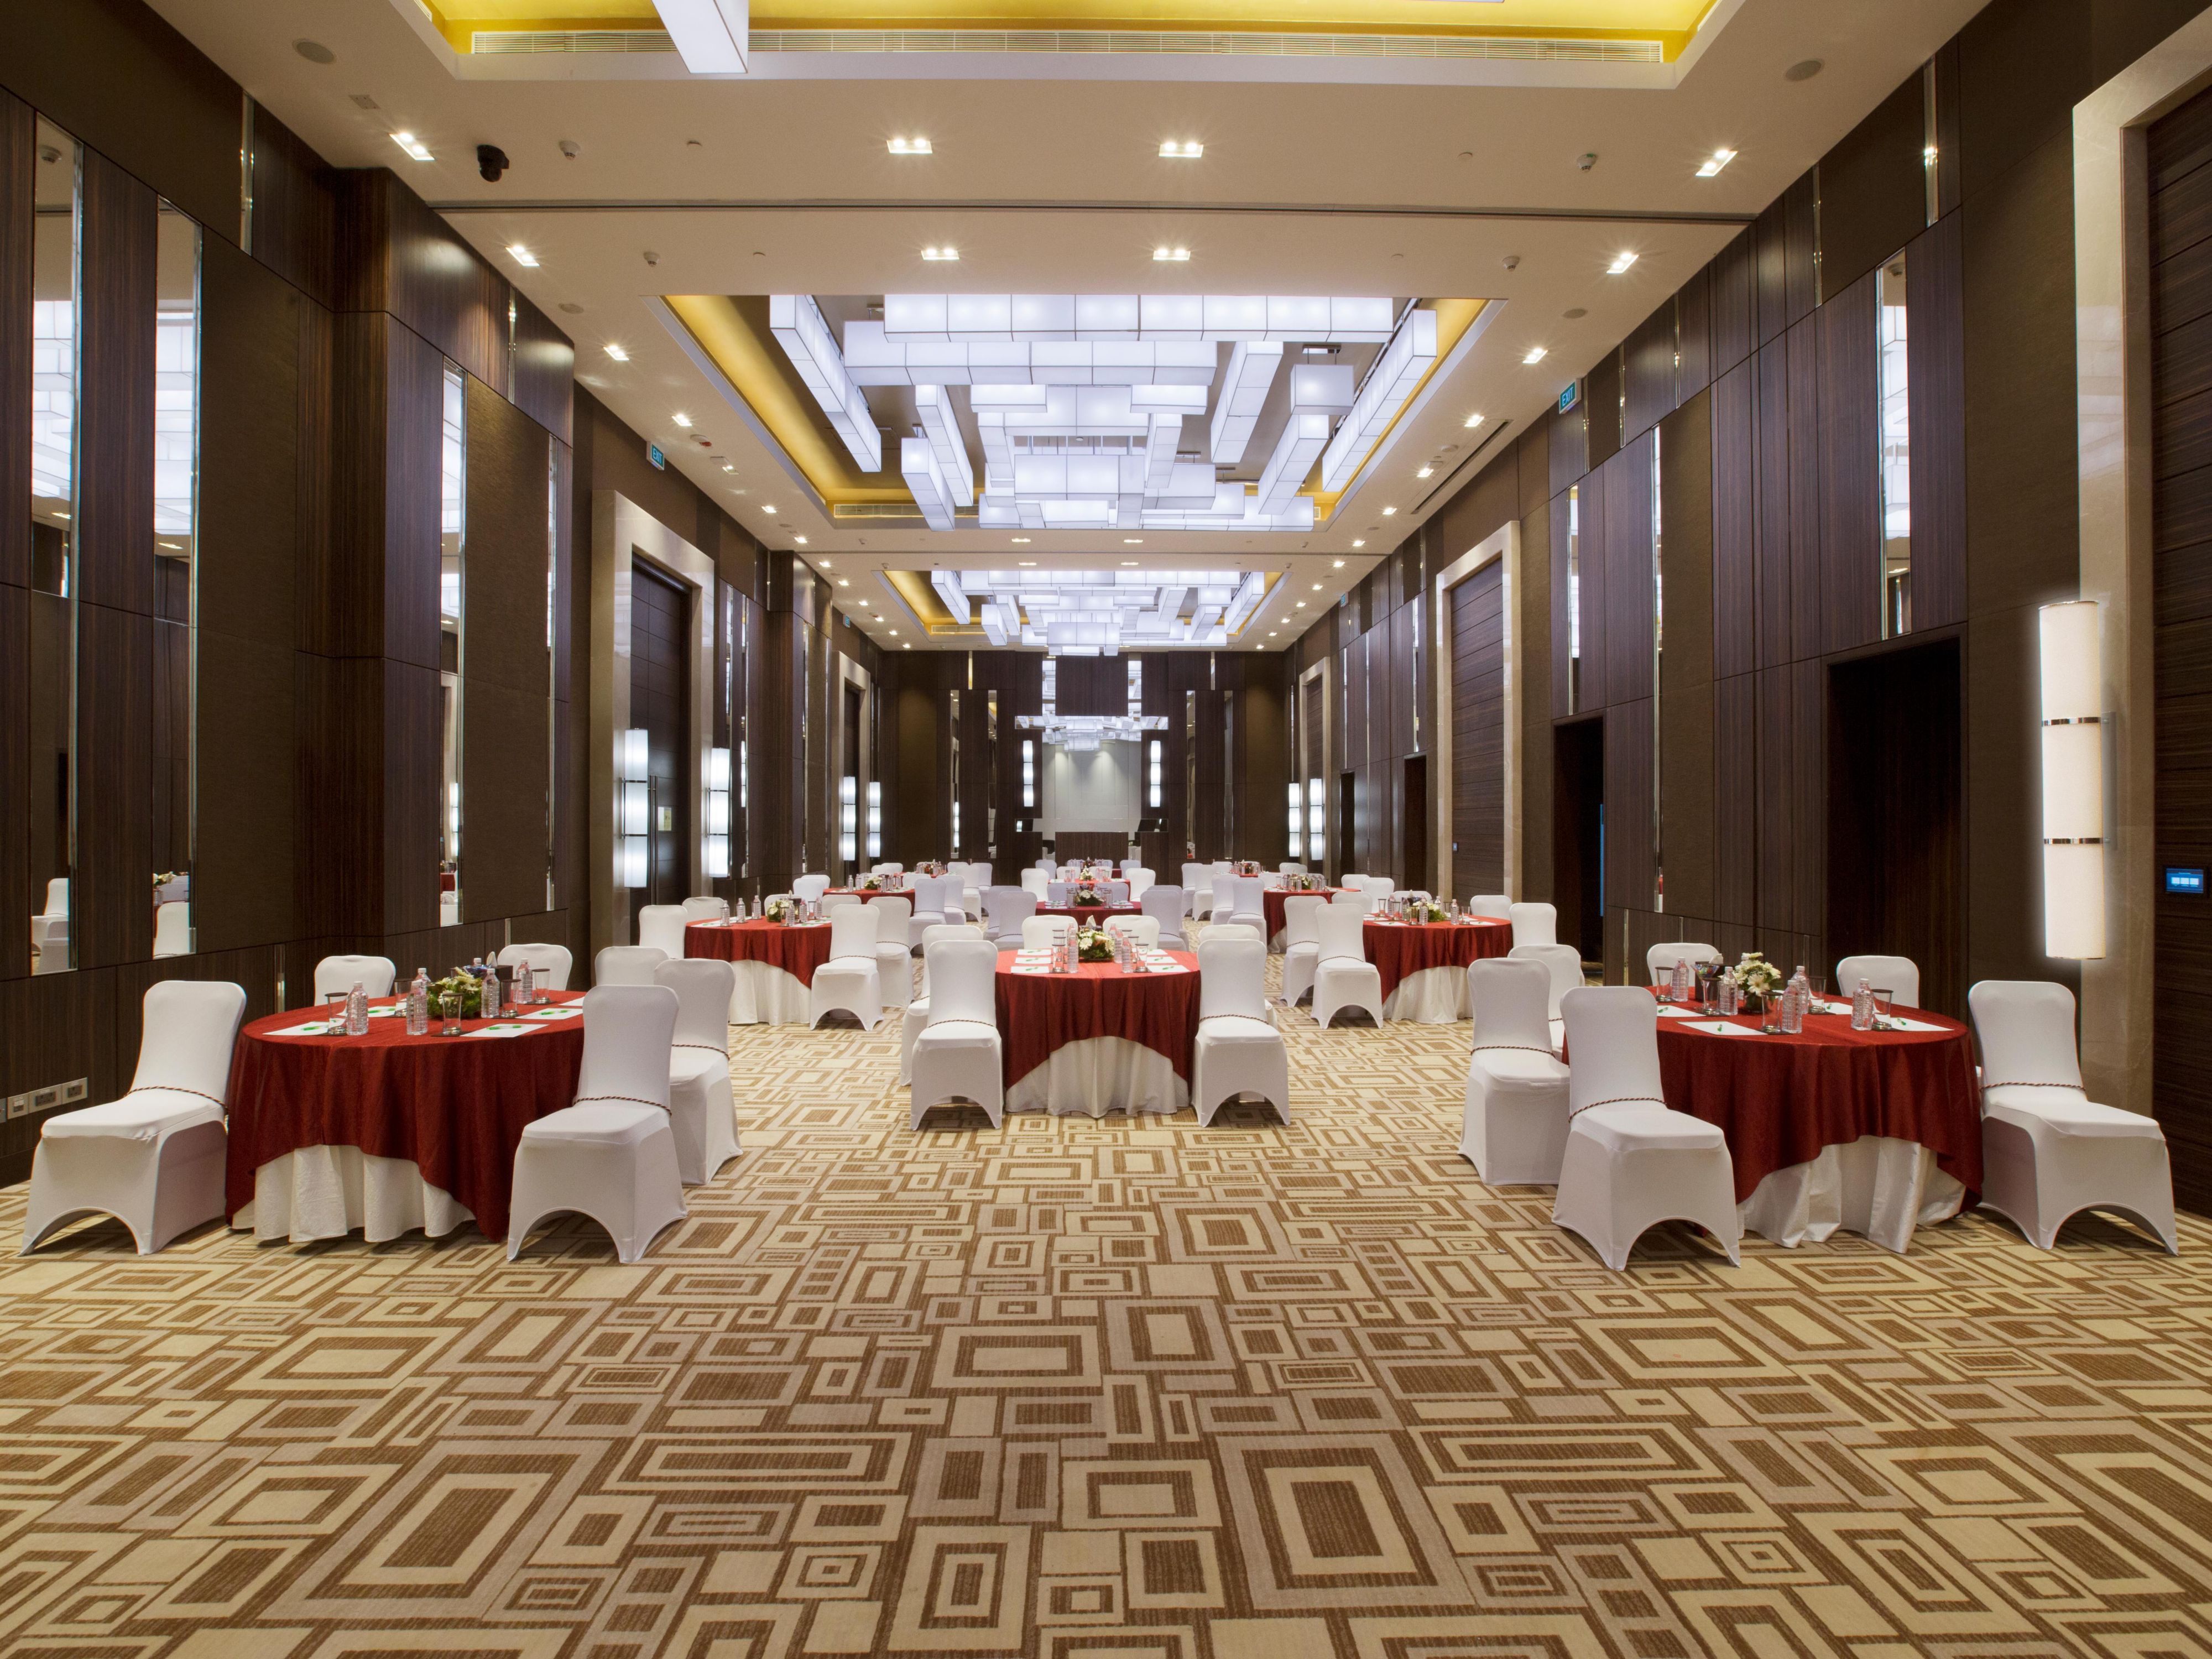 Holiday Inn in Chennai is the ideal venue for memorable events and celebrations. With a focus on creating unforgettable experiences, the Chennai hotel offers 7000 sq ft of spacious banquet facilities, a skilled team, and a diverse menu selection to cater to both, weddings and social gatherings as well as business meetings.